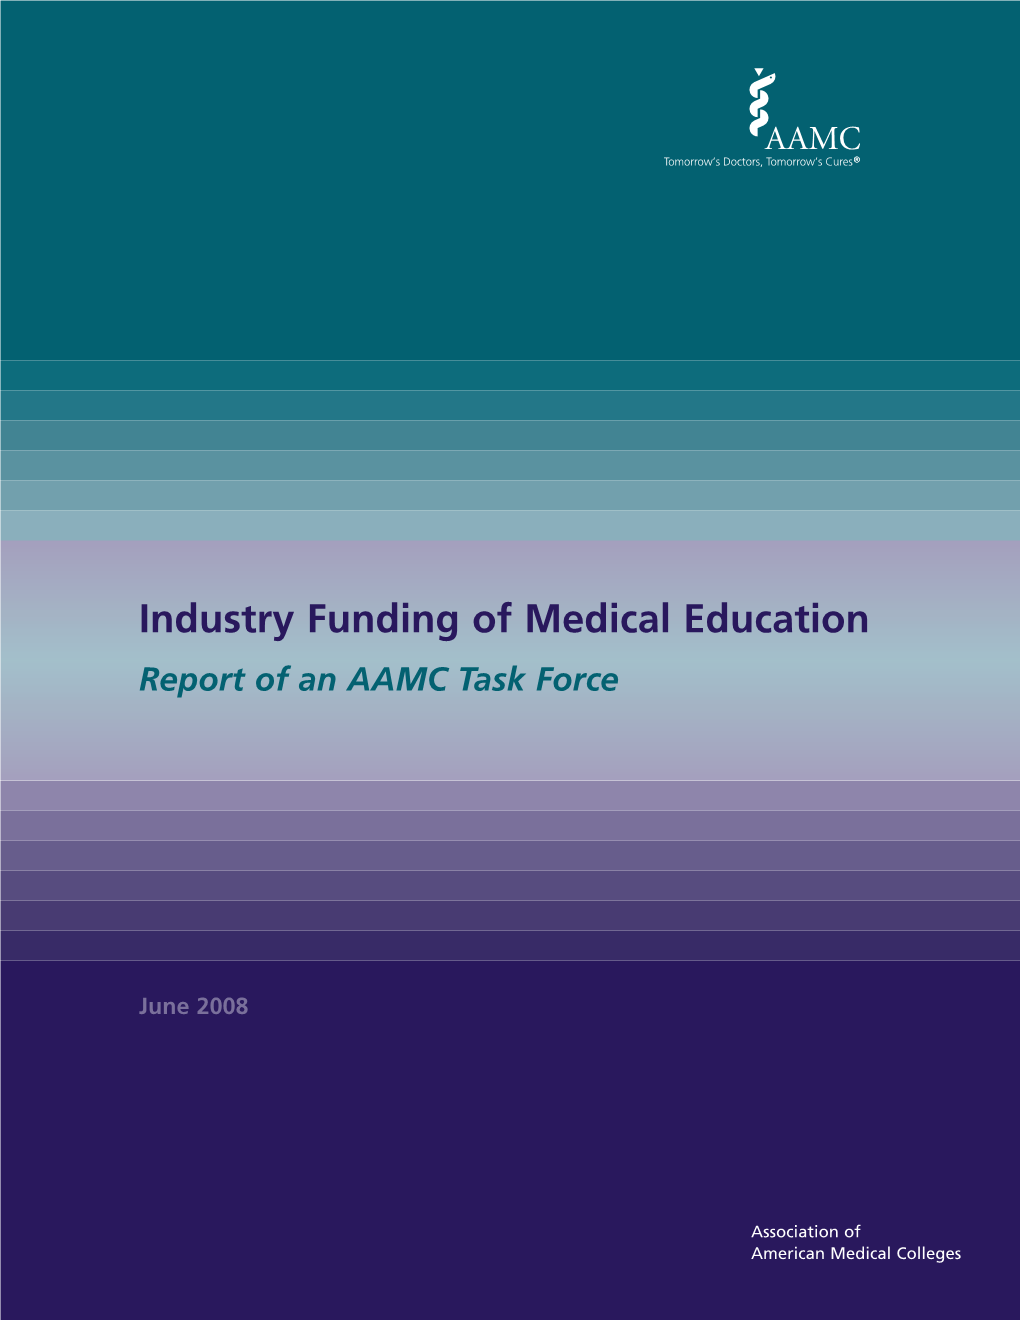 Industry Funding of Medical Education Report of an AAMC Task Force